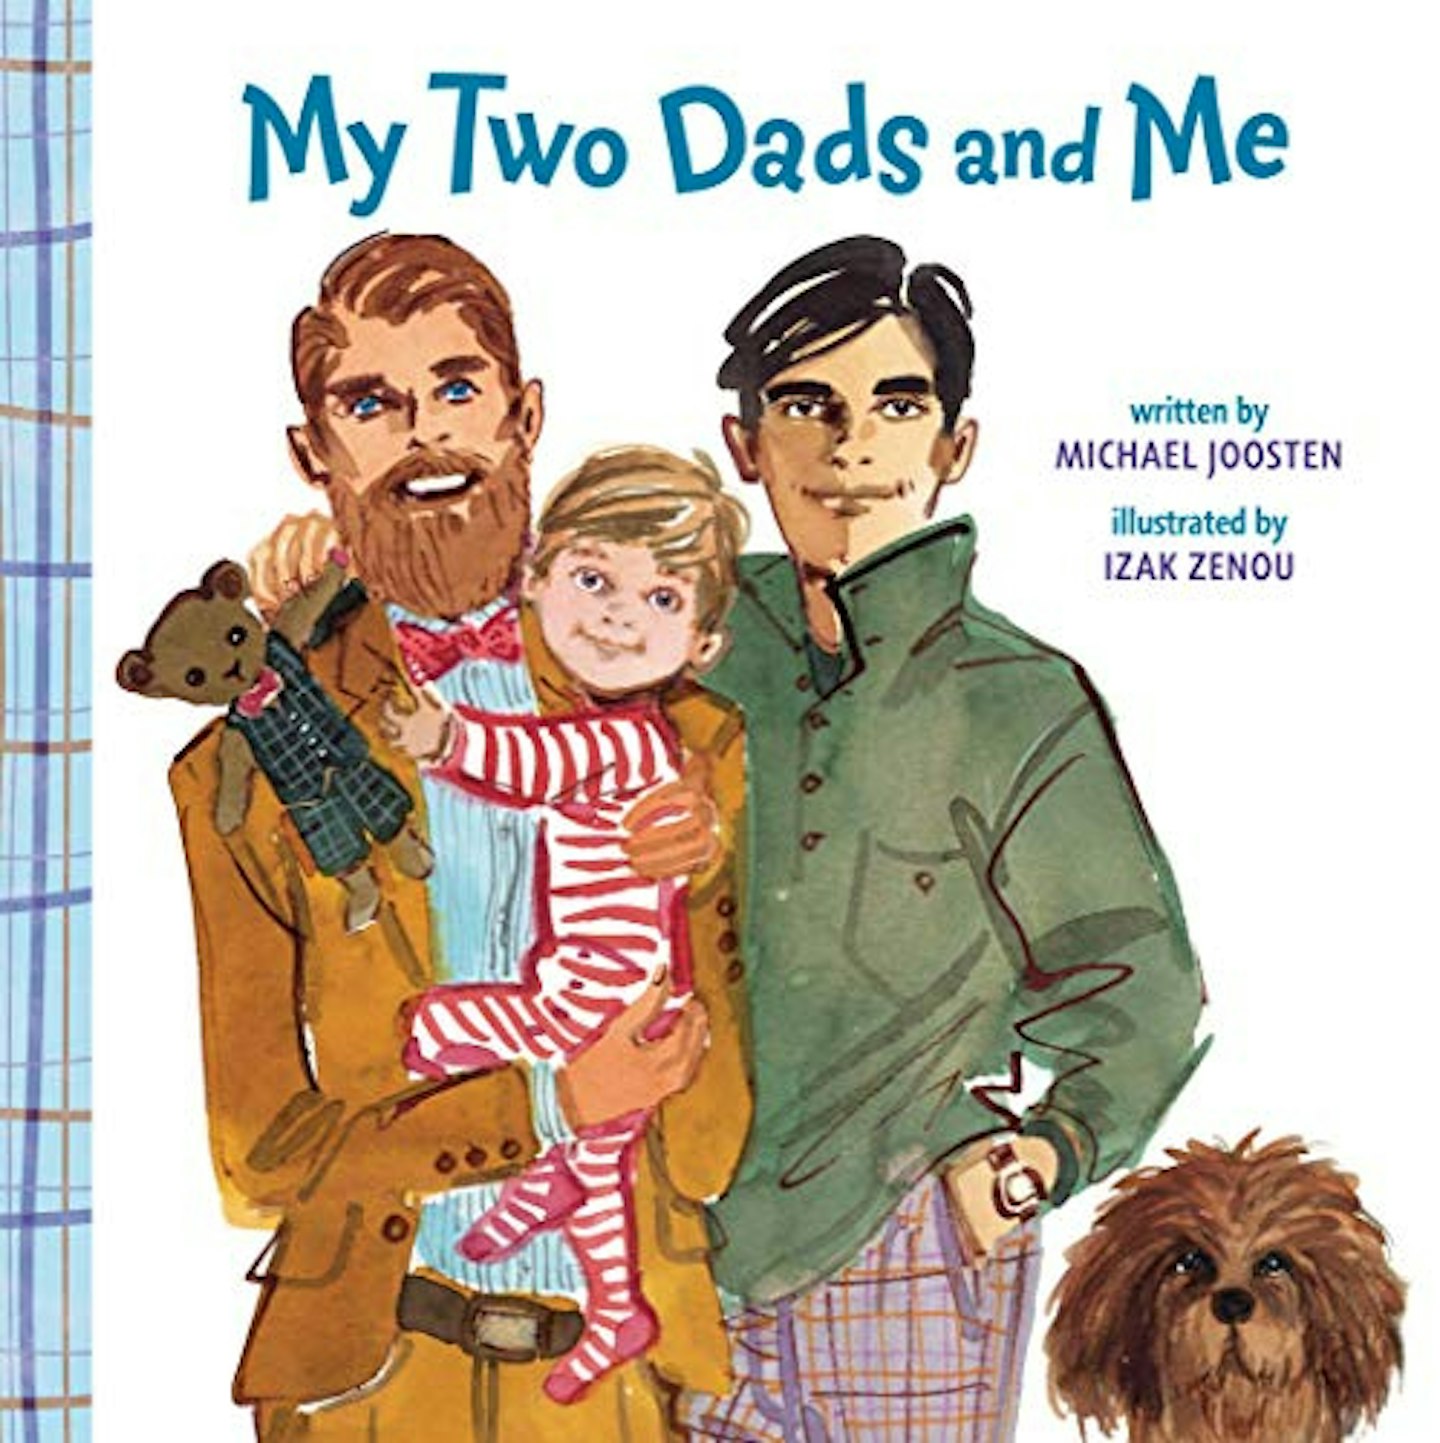 My Two Dads and Me, Michael Joosten